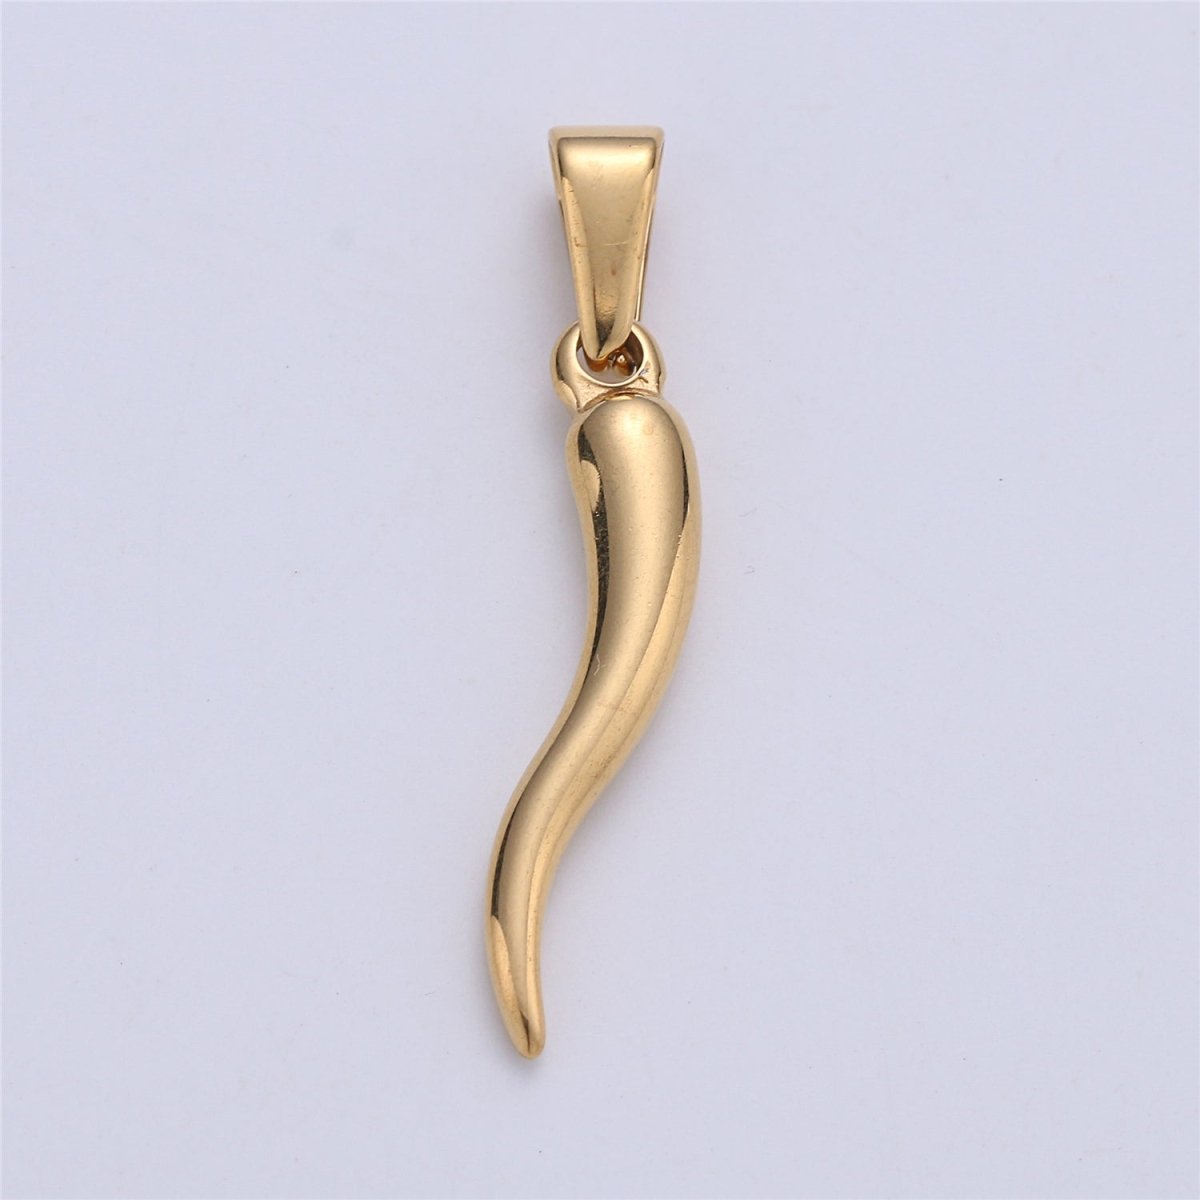 18K Gold Filled, Silver Stainless Steel 40mm Italian Horn Charm Pendant, Protection Amulet For Necklace Jewelry Making Component Supply | E660 - DLUXCA